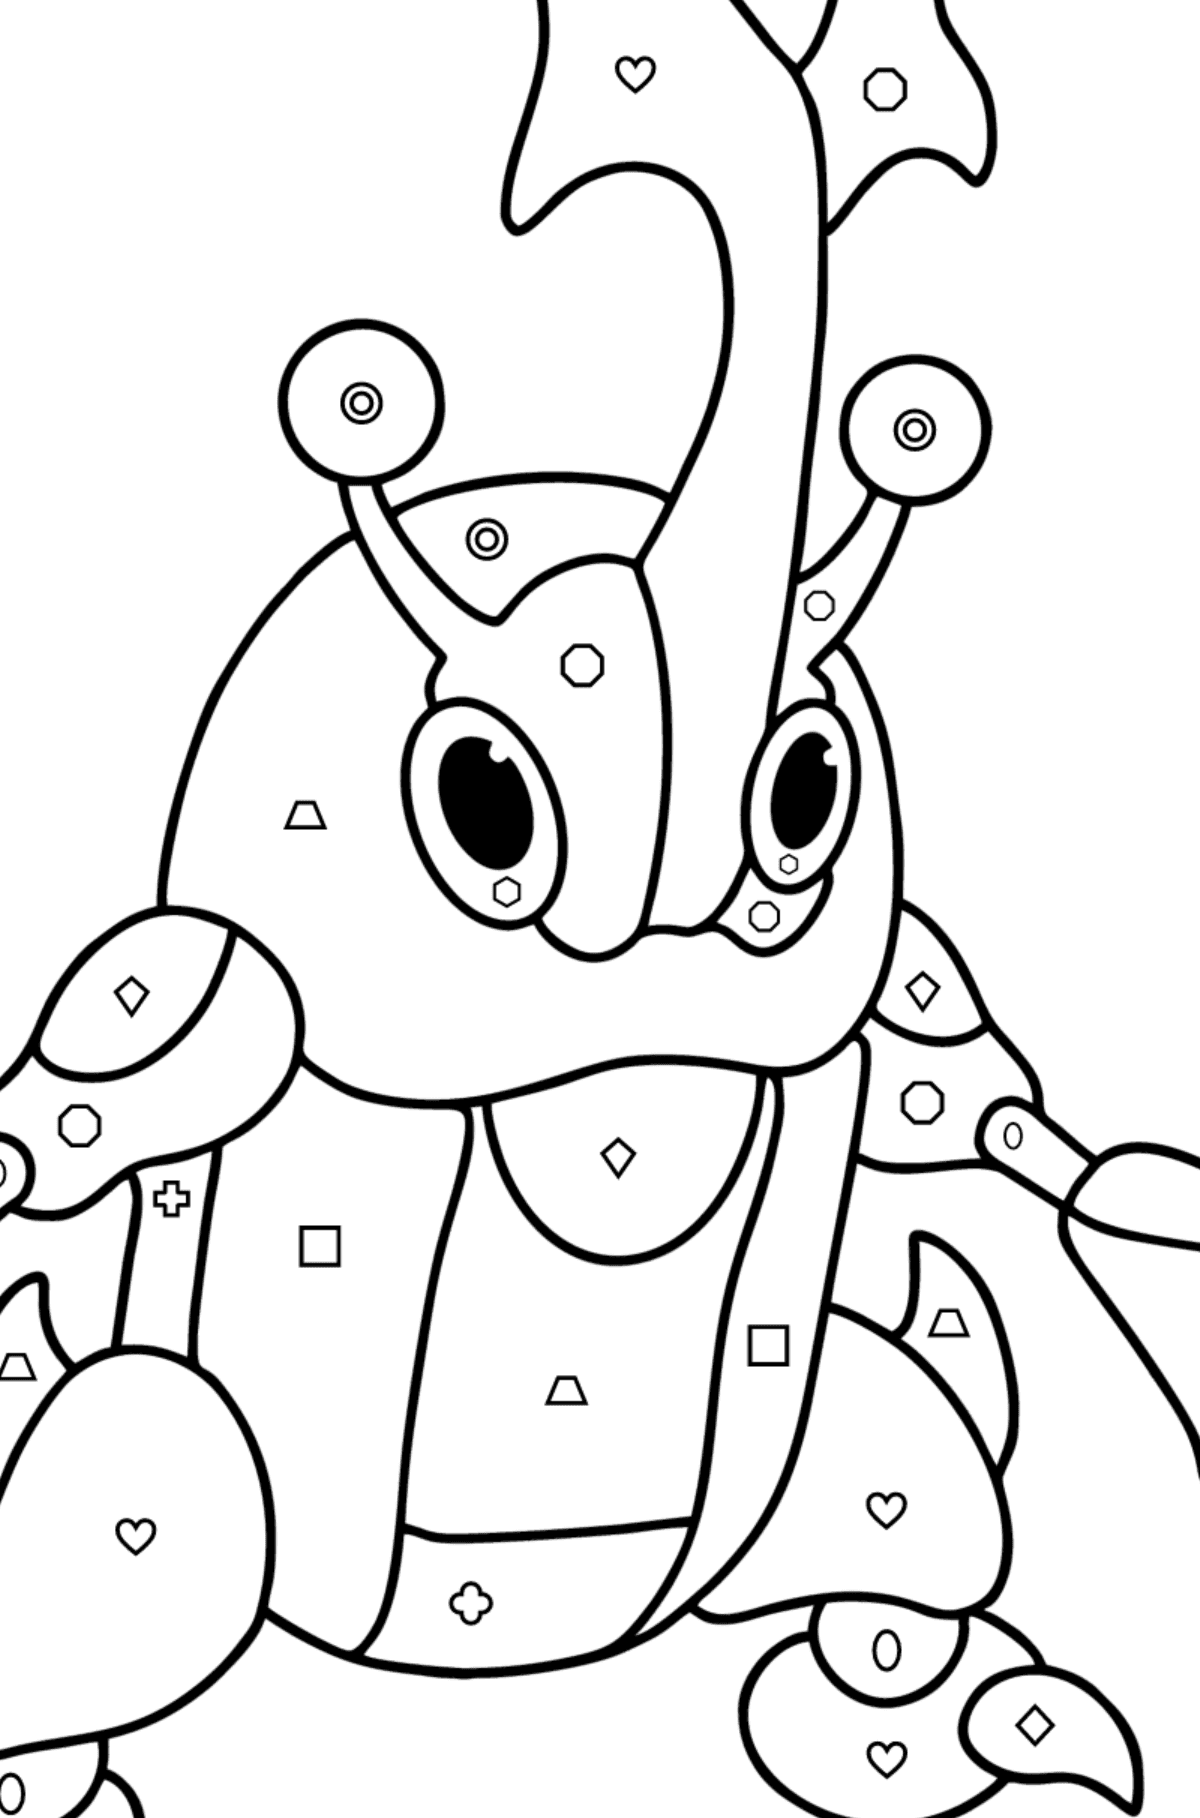 Colouring page Pokémon X and Y Heracross - Coloring by Geometric Shapes for Kids